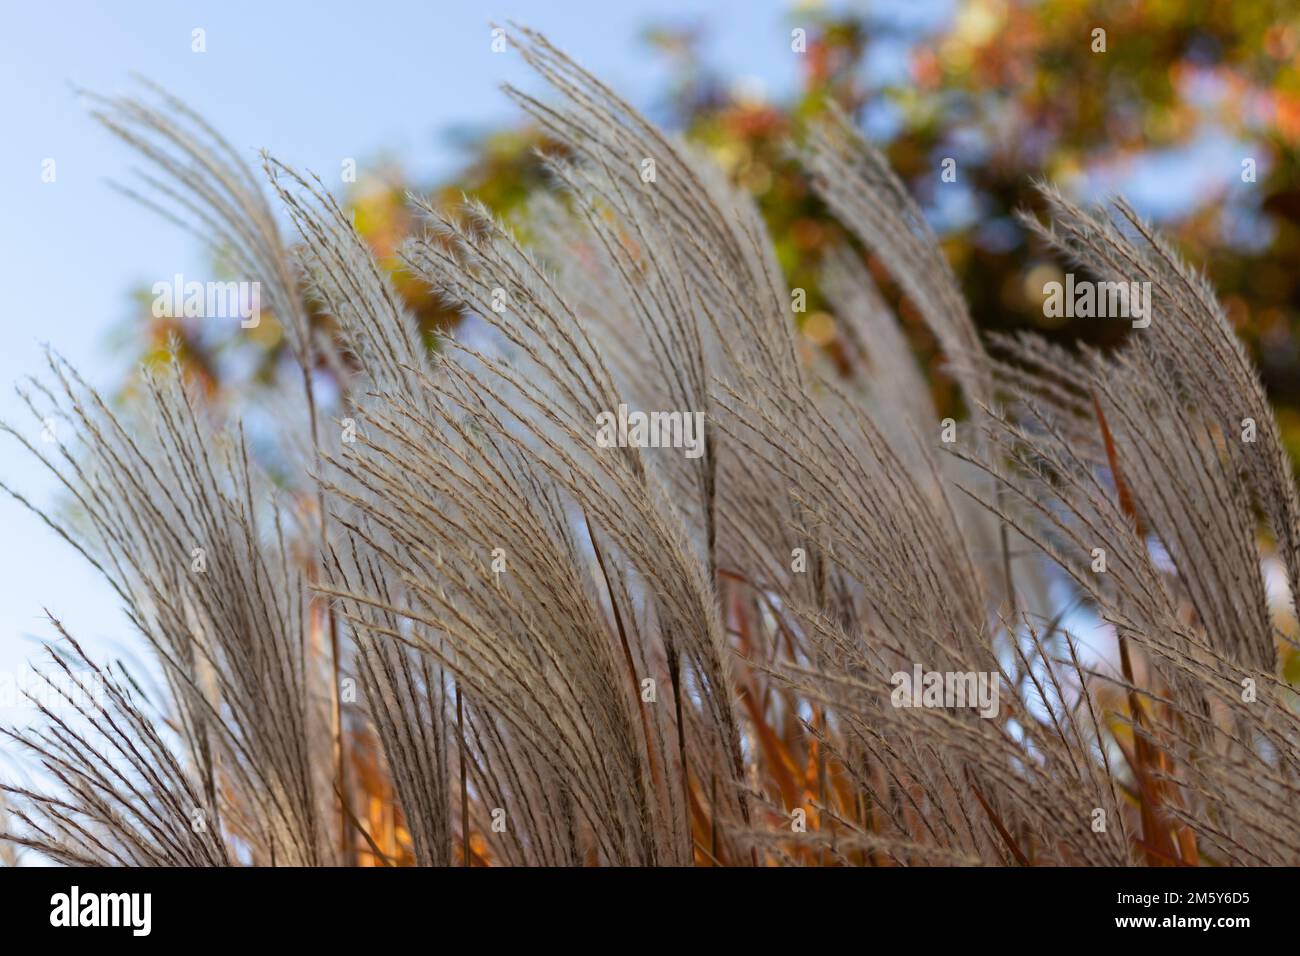 A closeup of amur silver grass, Miscanthus sacchariflorus captured against a blurred background Stock Photo